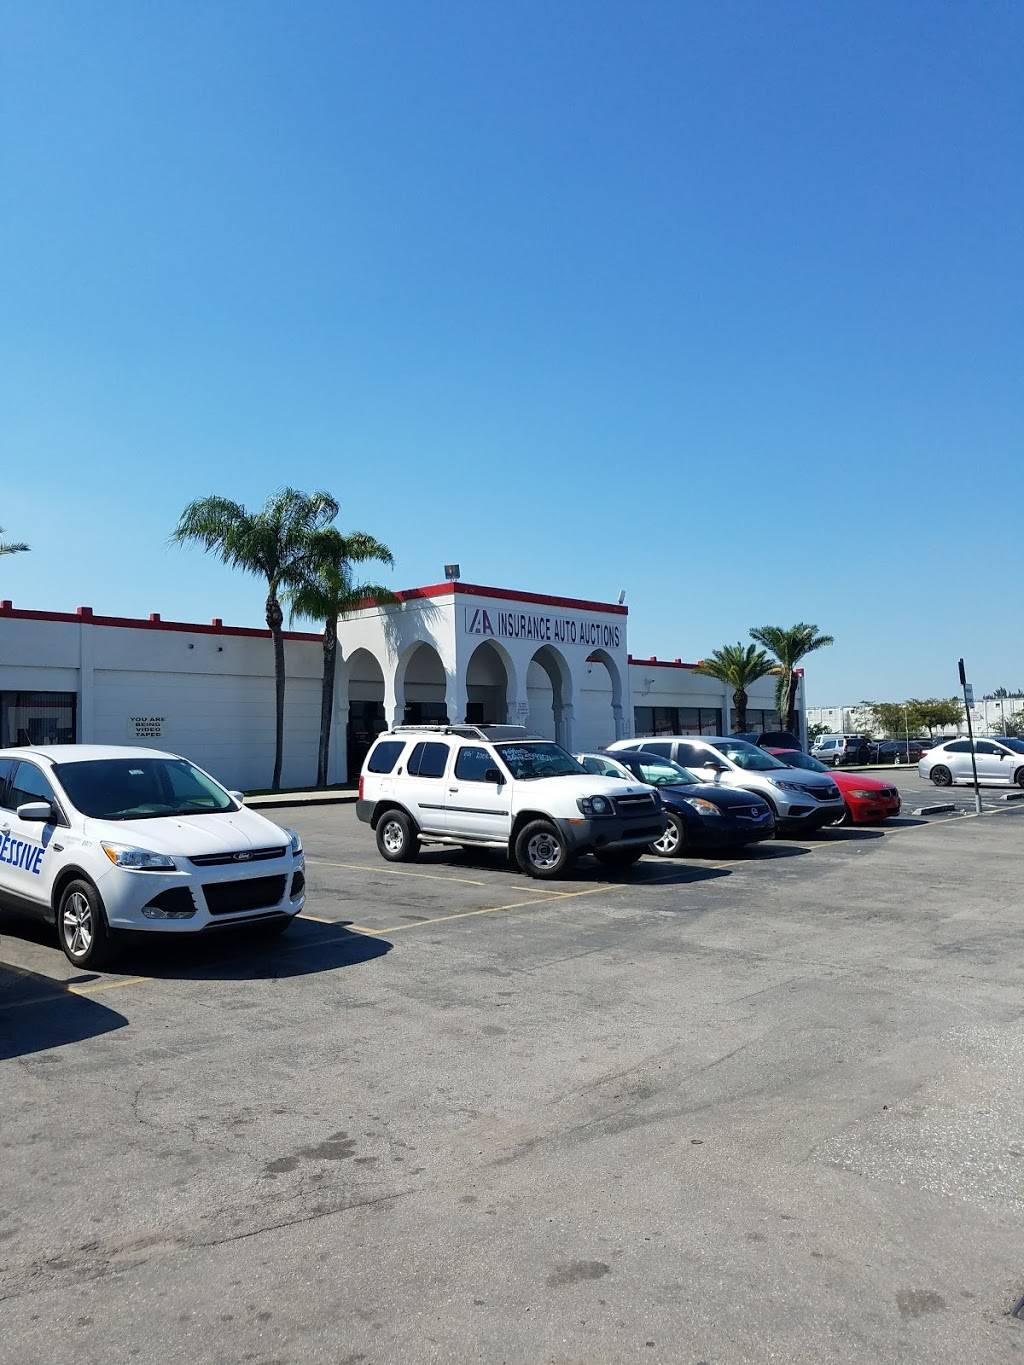 Insurance Auto Auctions | 12700 NW 42nd Ave, Opa-locka, FL 33054 | Phone: (800) 526-8402